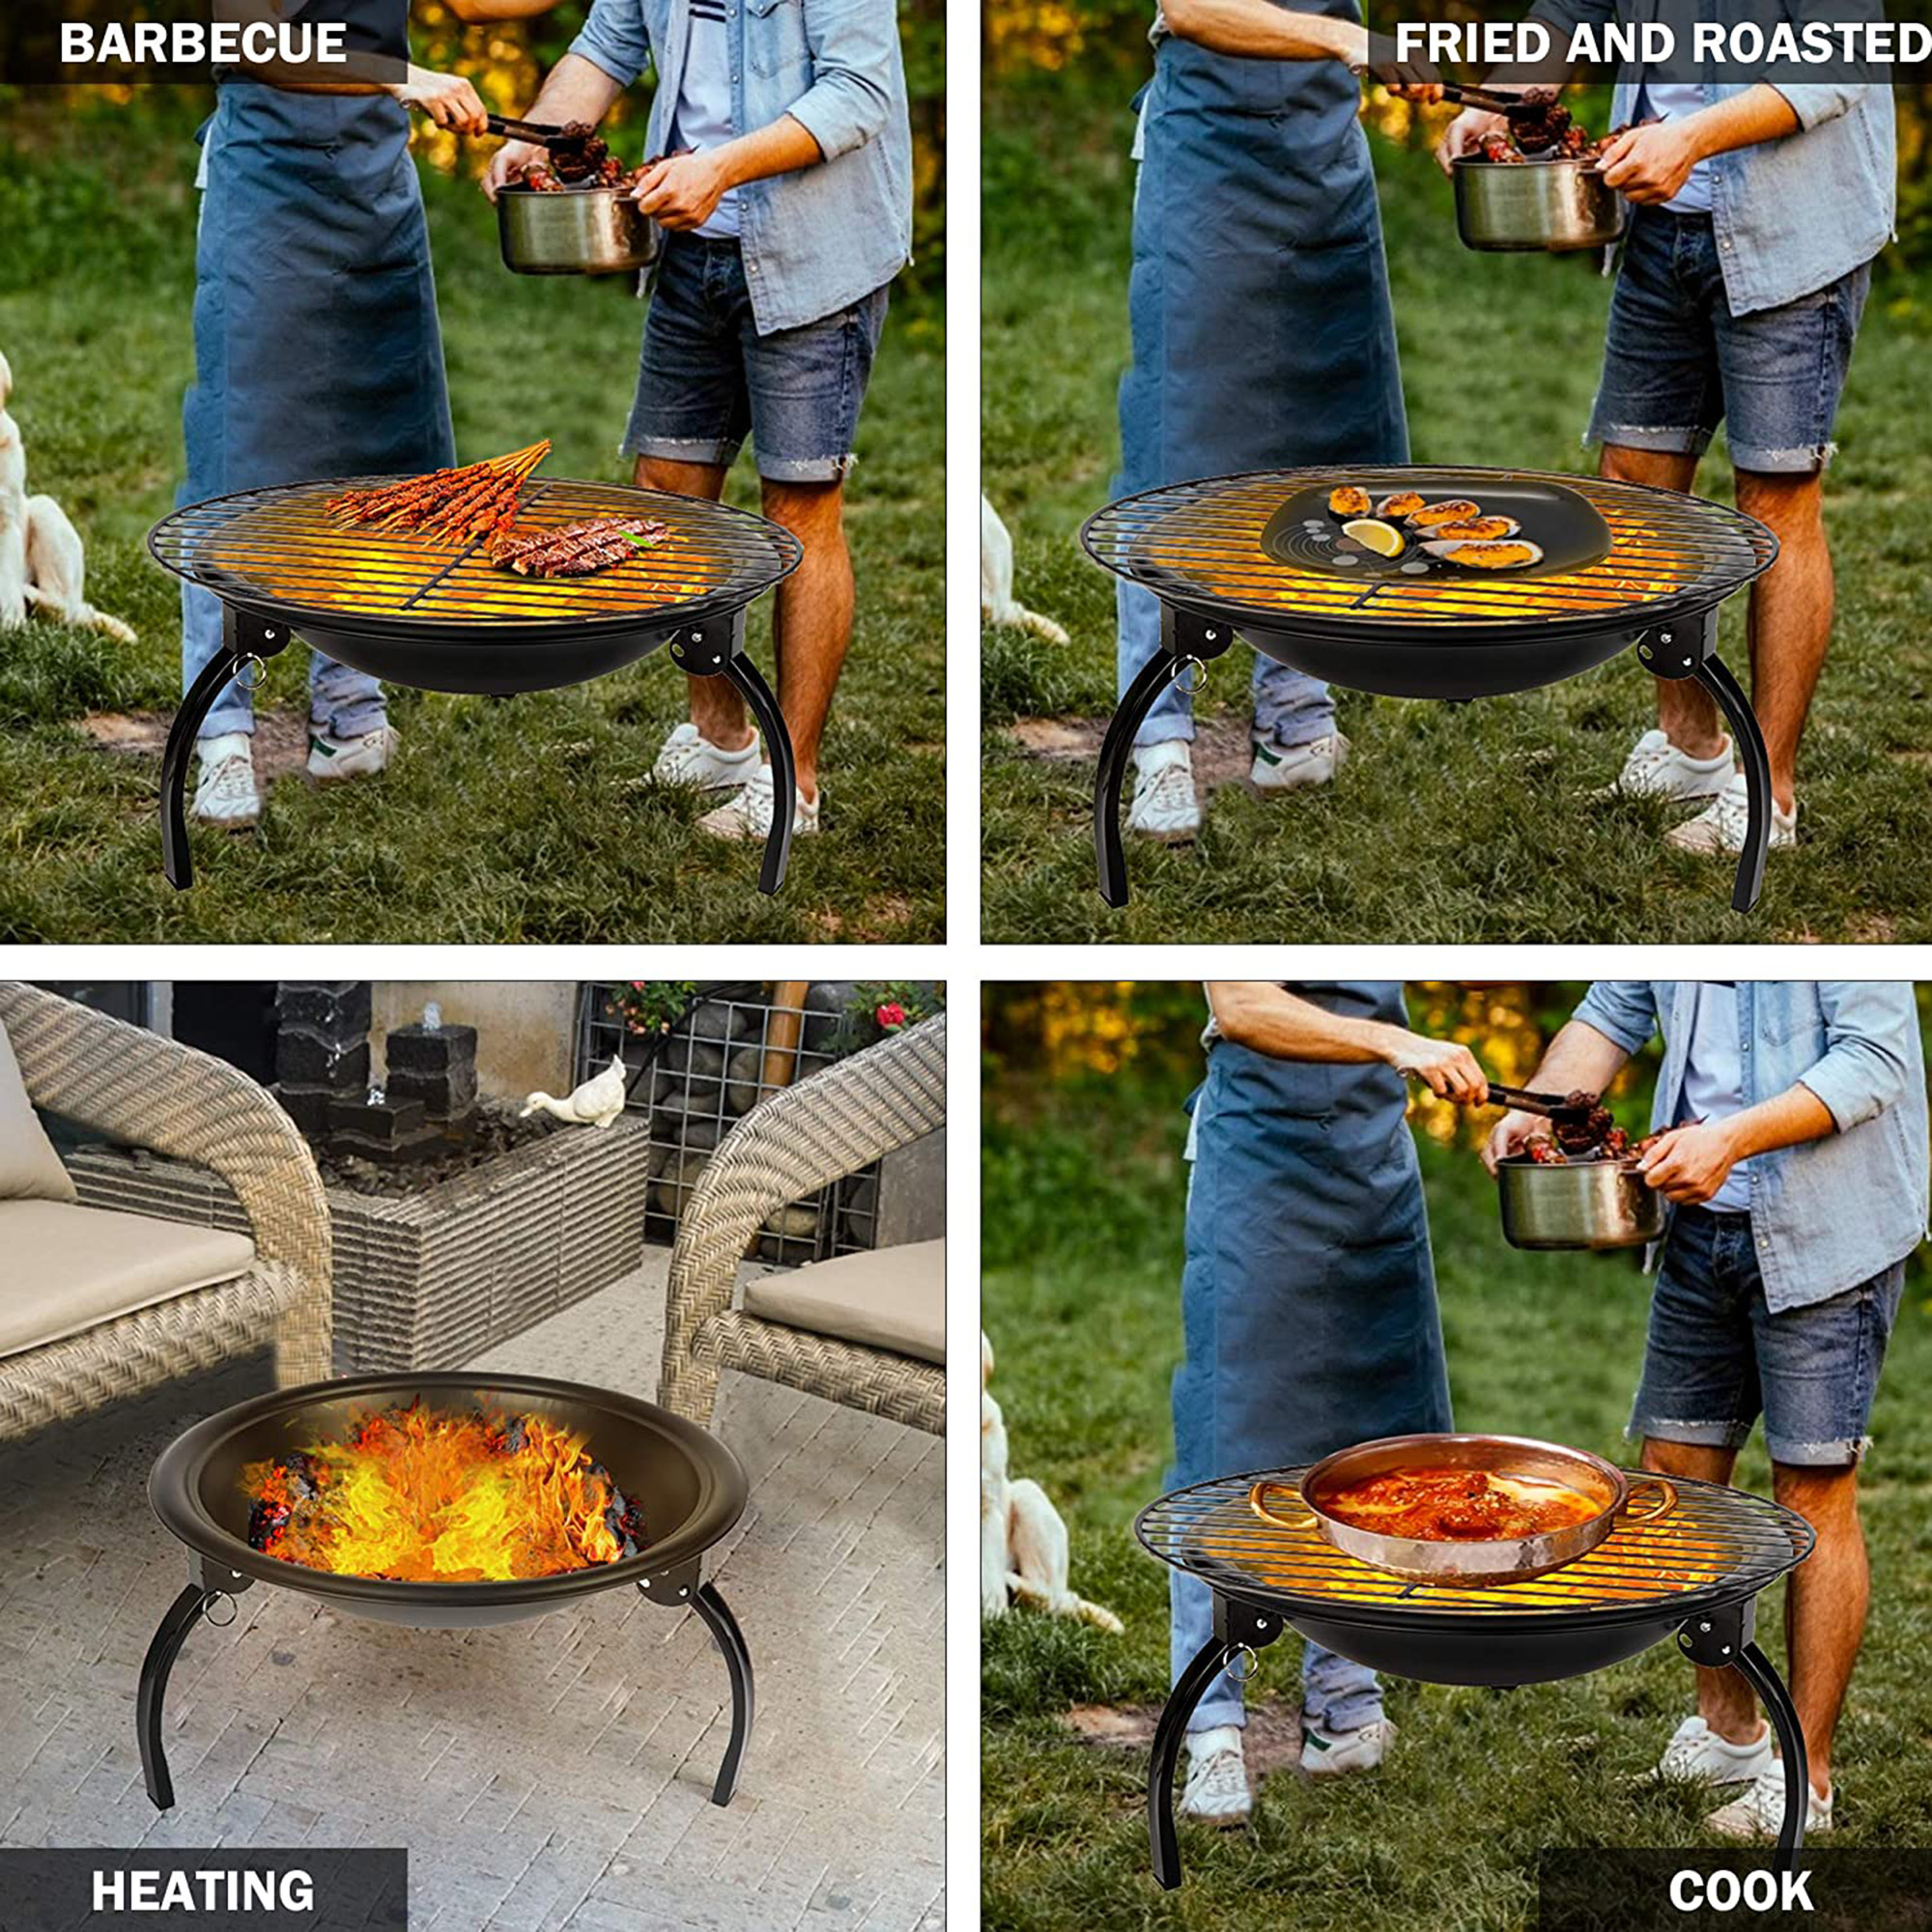 KARMAS PRODUCT 21'' Portable Fire Pit Outdoor Wood Burning BBQ Grill Firepit Bowl with Mesh Spark Screen Cover Fire Poker for Backyard Garden Camping Picnic Beach Park - image 3 of 7